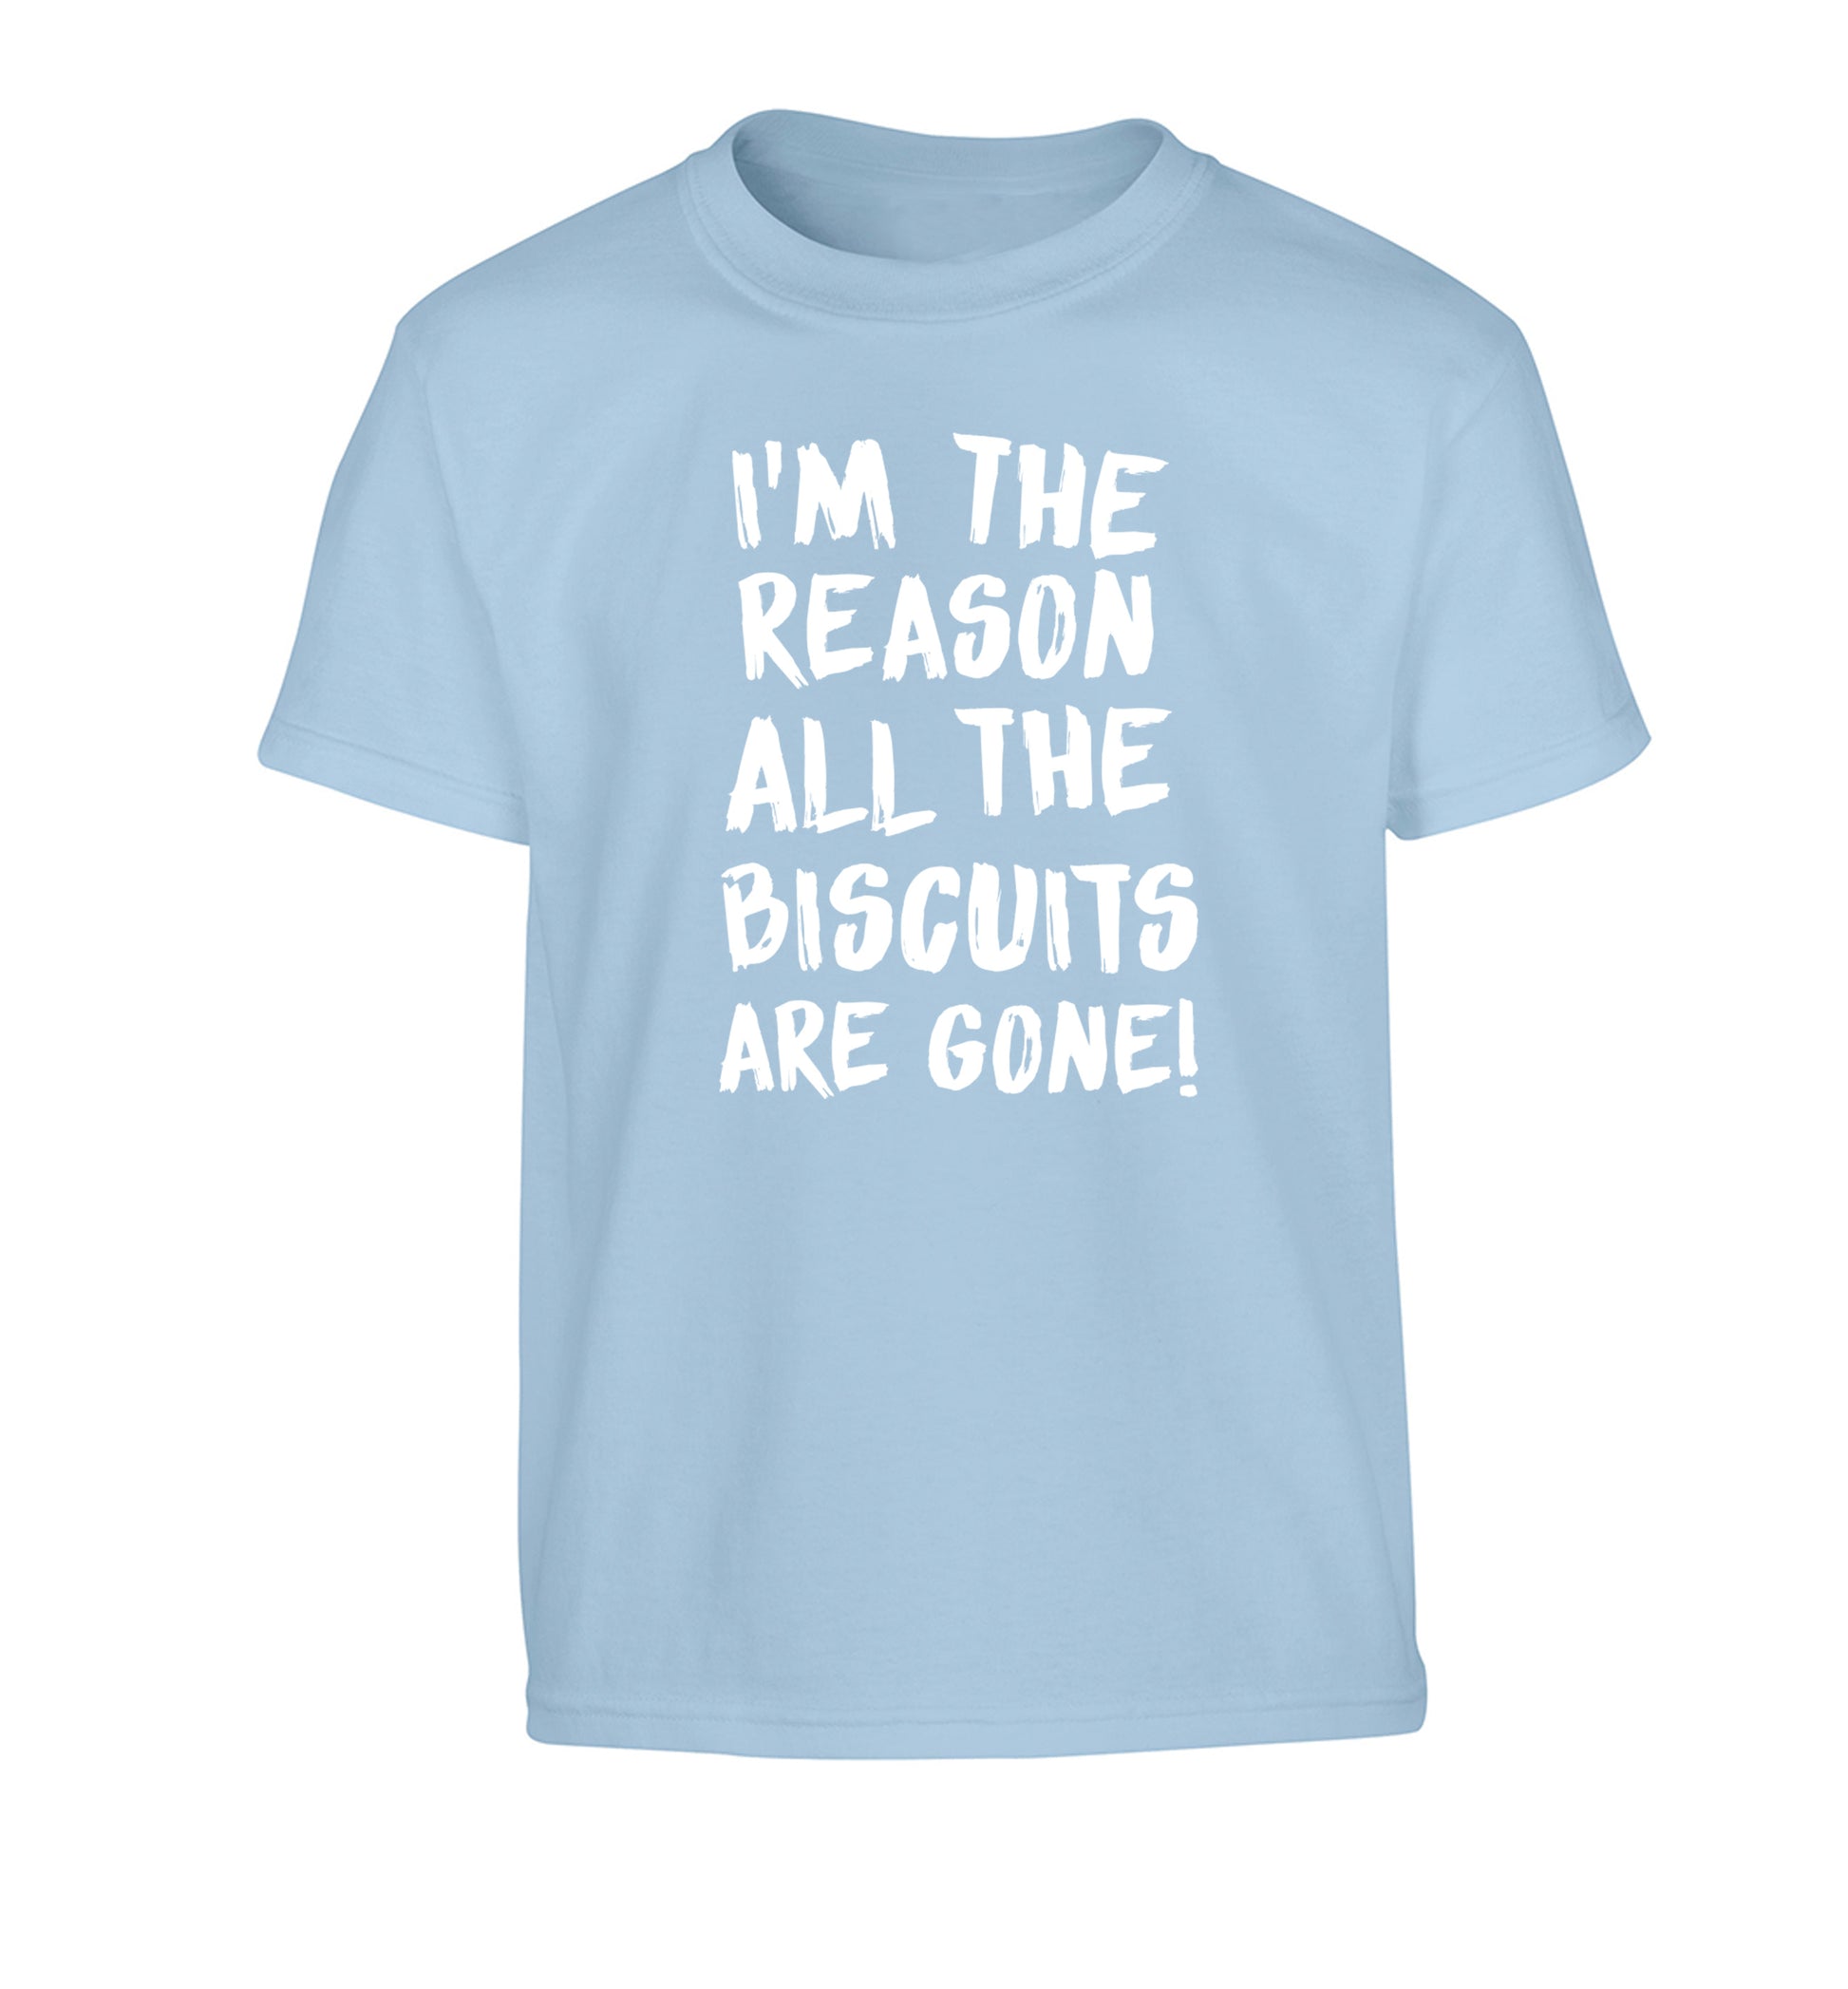 I'm the reason why all the biscuits are gone Children's light blue Tshirt 12-13 Years